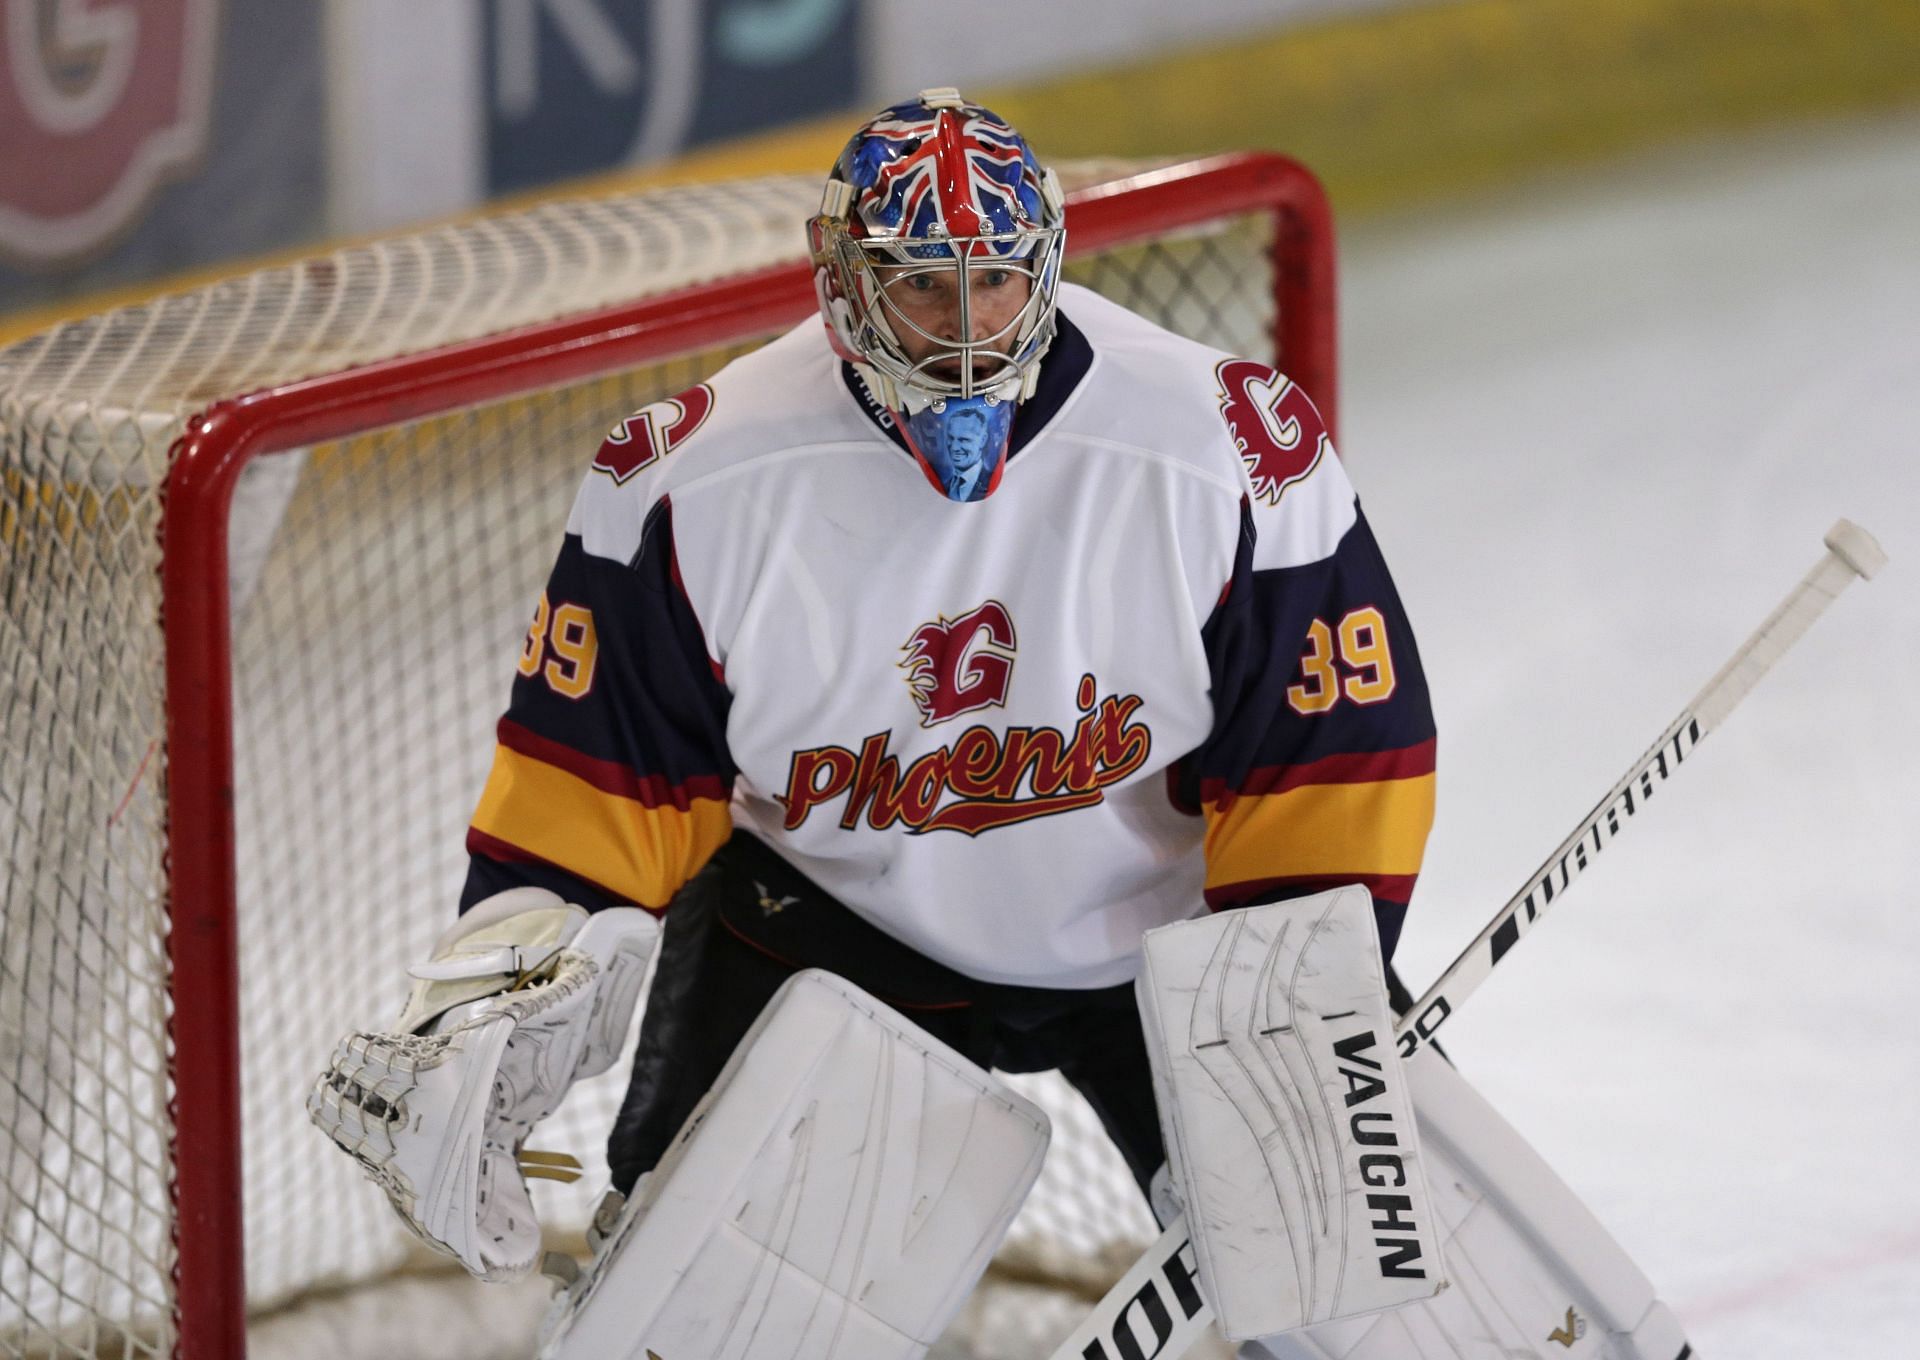 Petr Cech in goal for the Guildford Phoenix (Photo by Henry Browne/Getty Images)